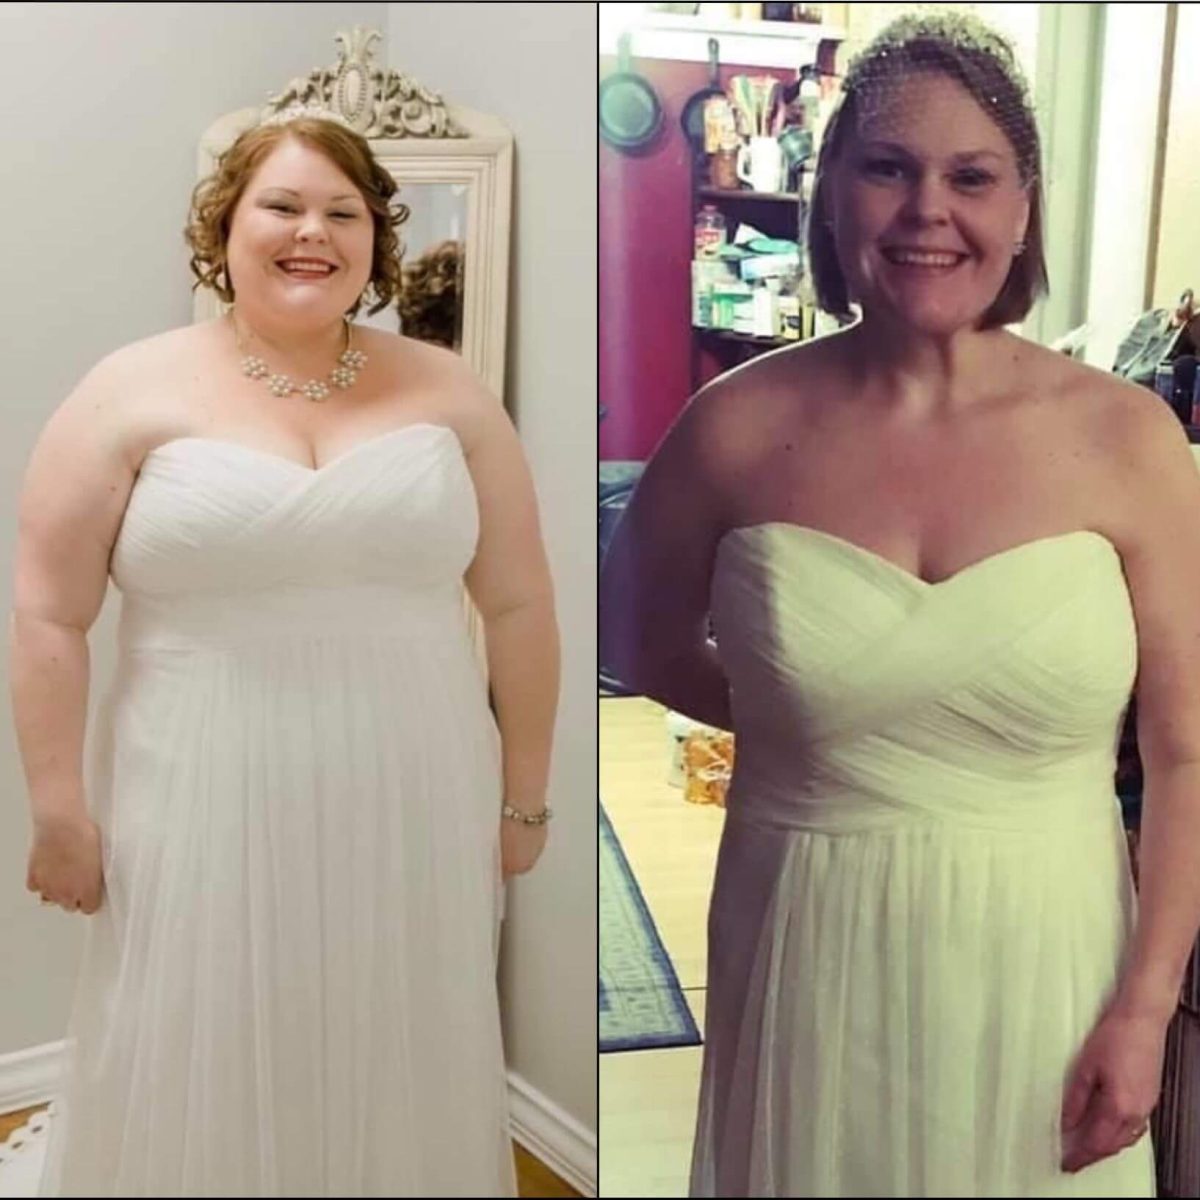 A woman in a wedding dress before and after weight loss